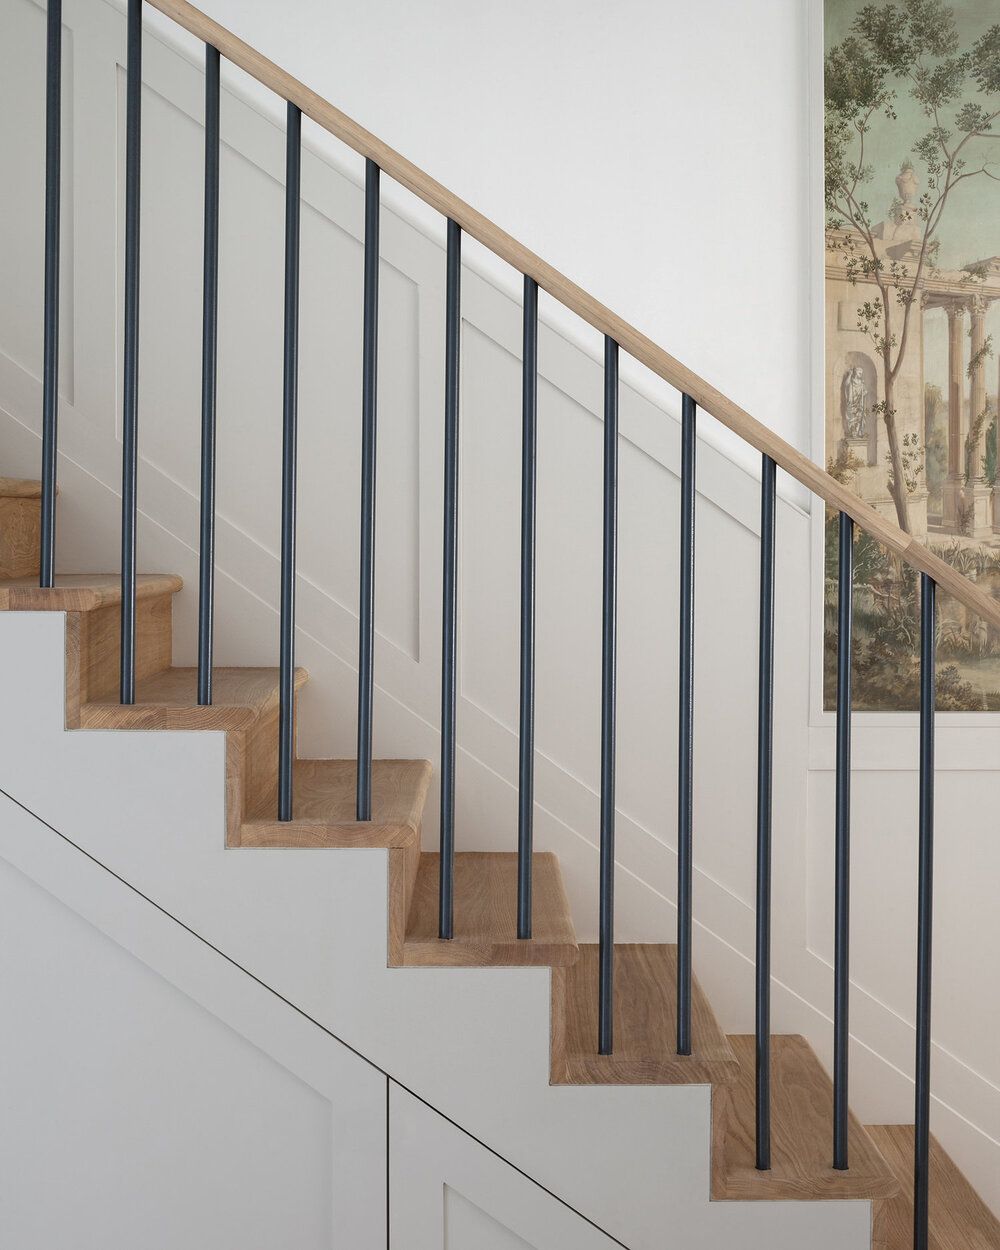 Inspiration for the entryway stairs |  Leibal